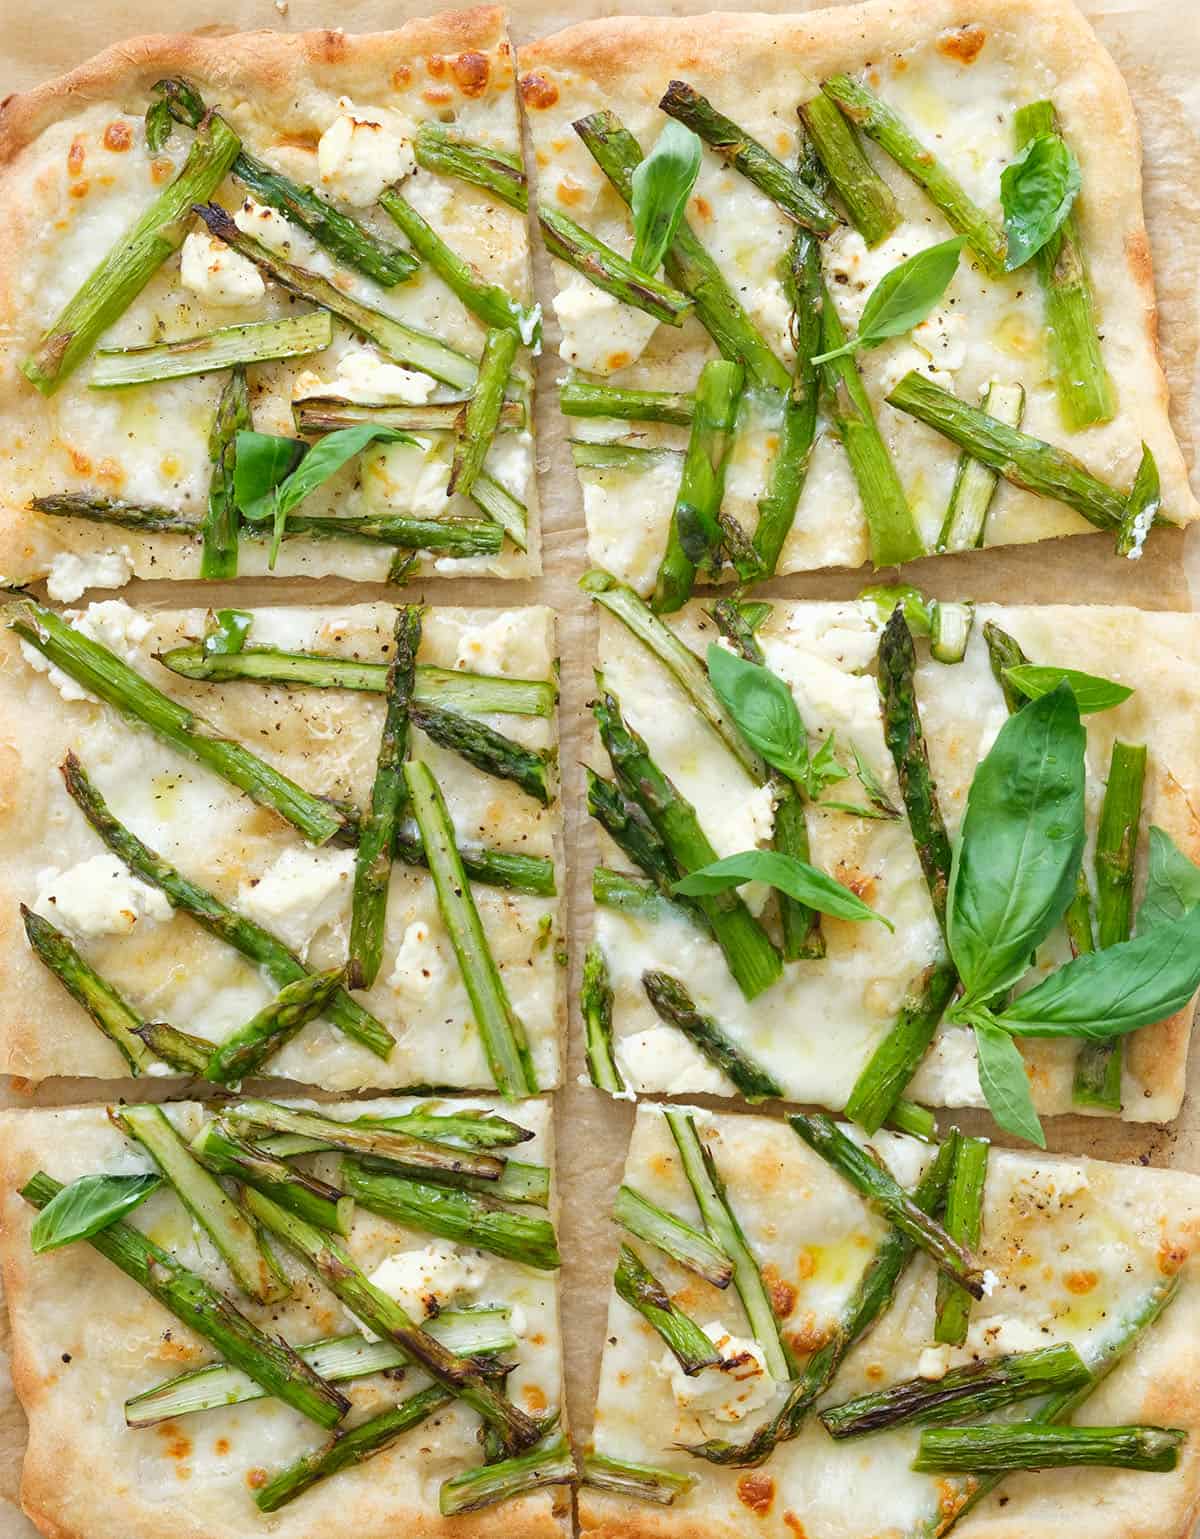 Top view of a large asparagus pizza made with fresh mozzarella, cream cheese, fresh basil leaves and cut into slices.